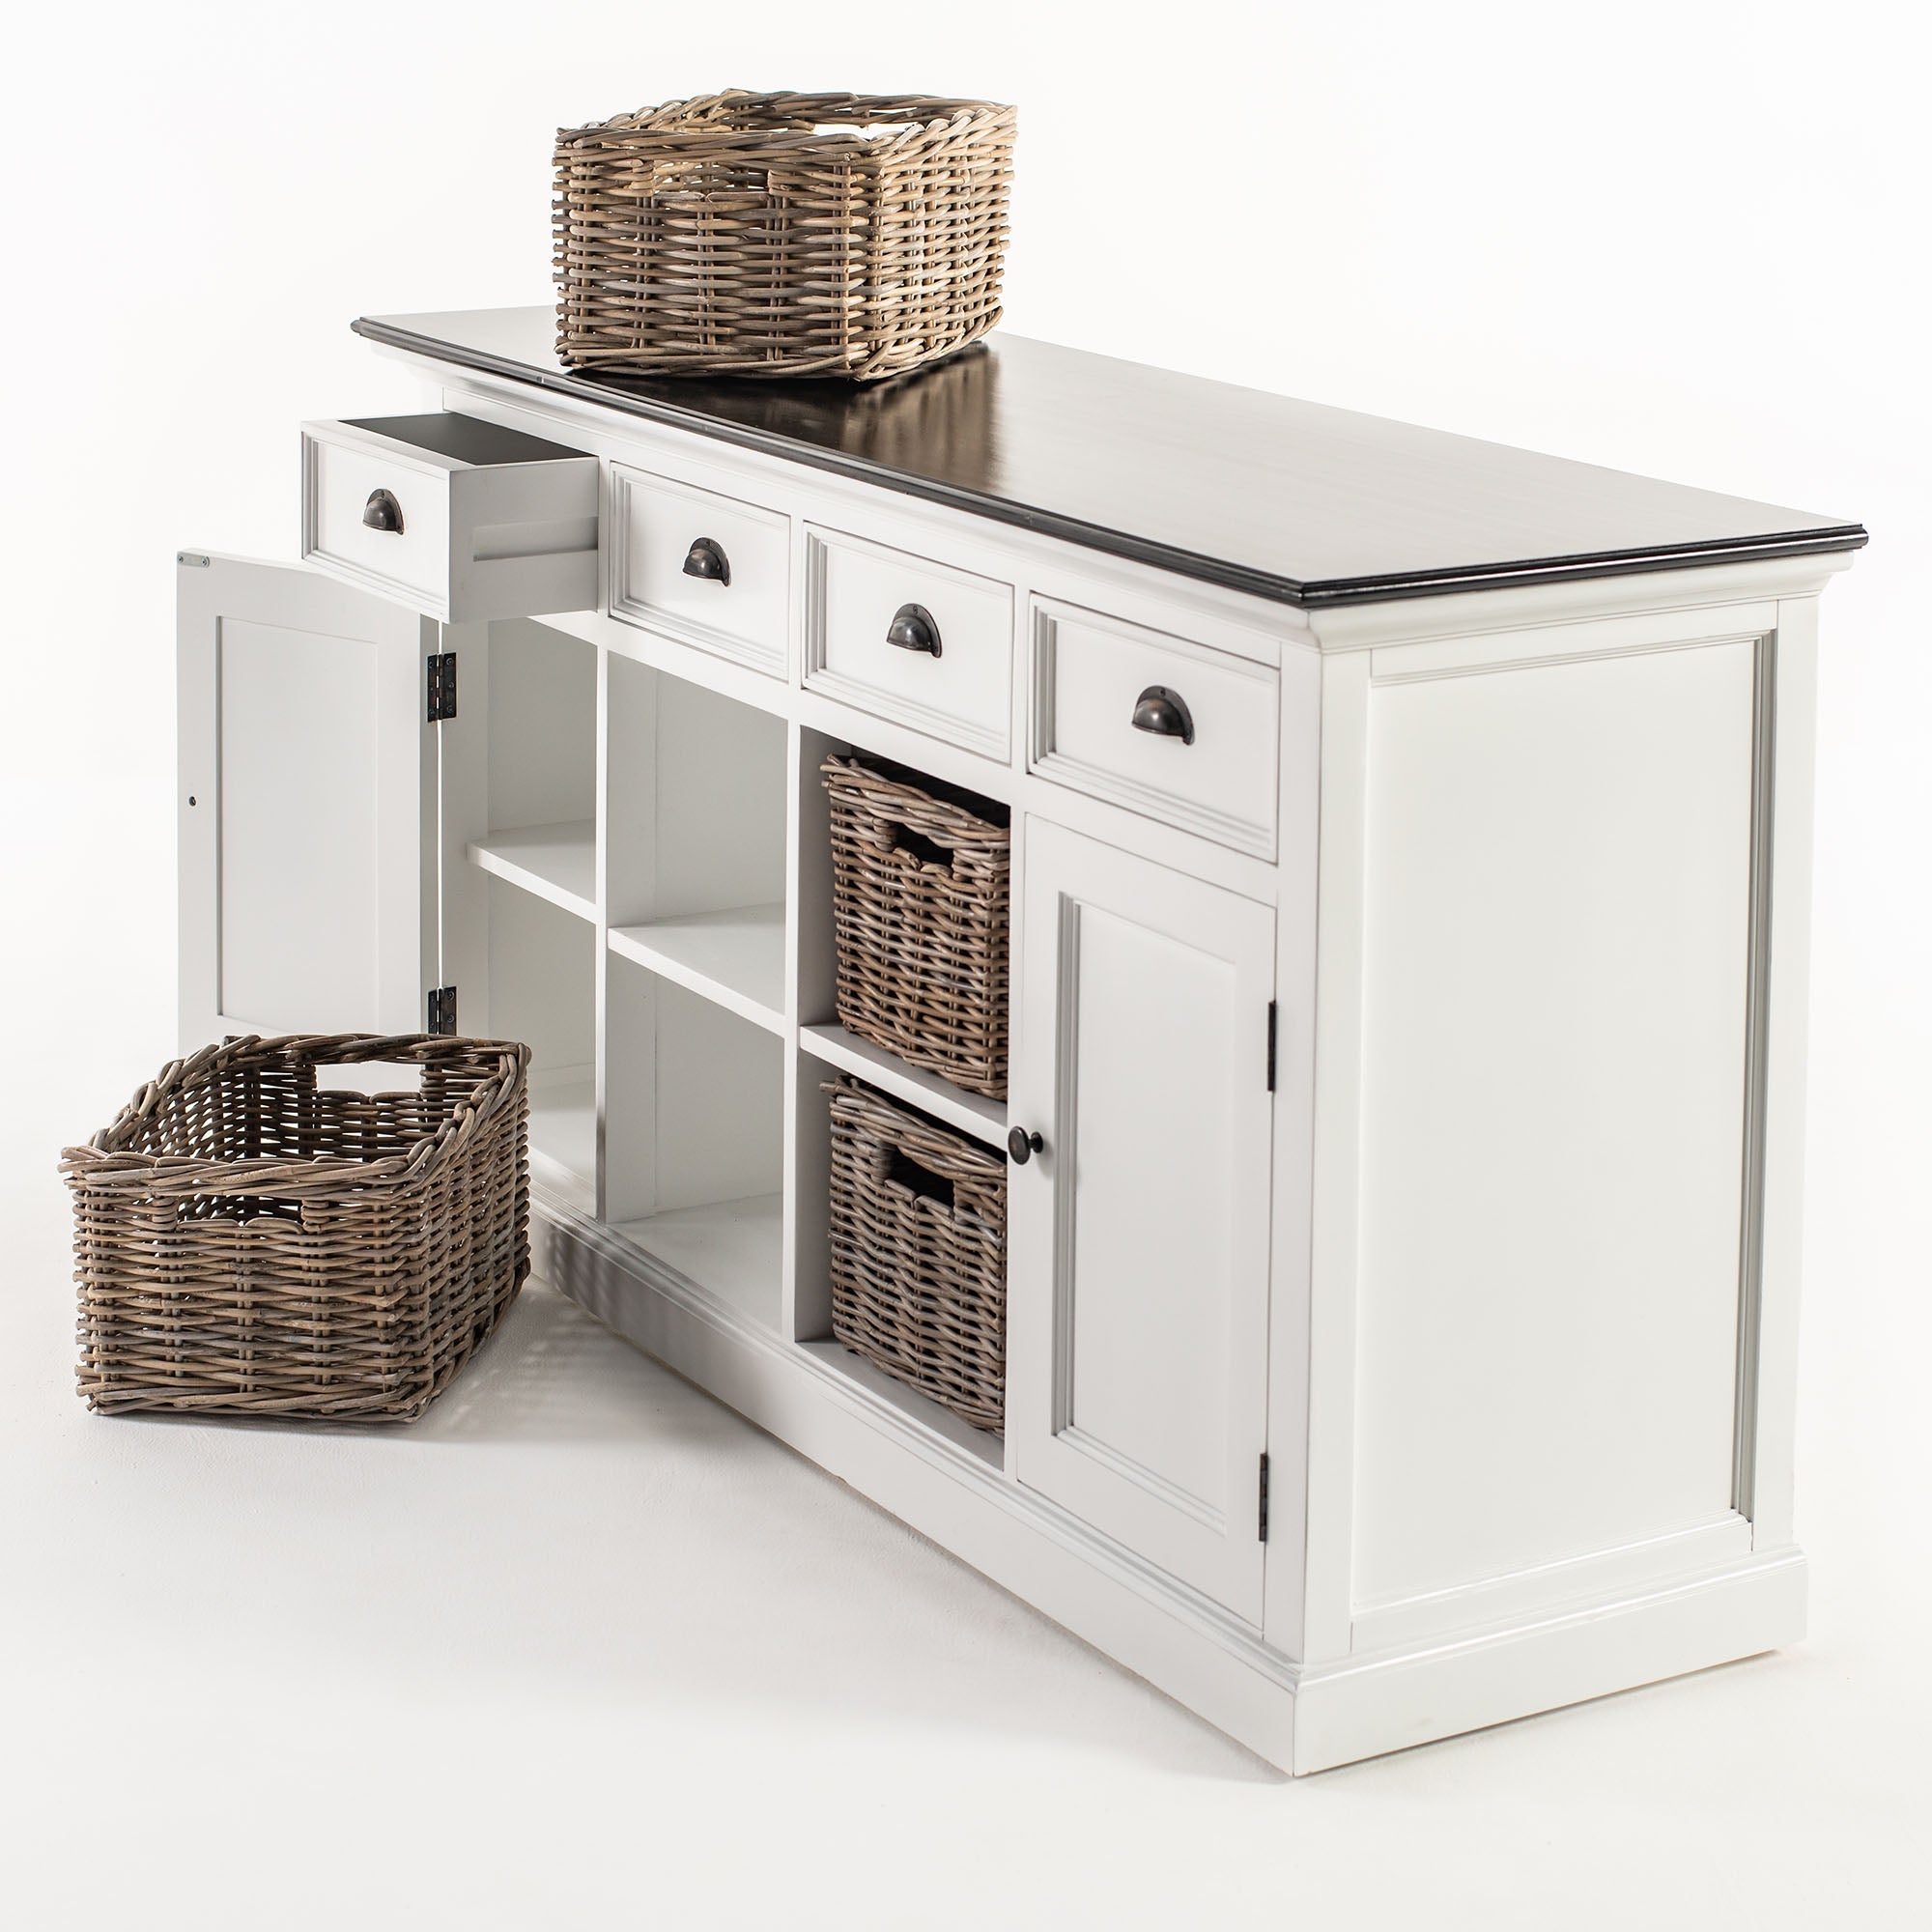 Halifax Contrast sideboard with 4 baskets